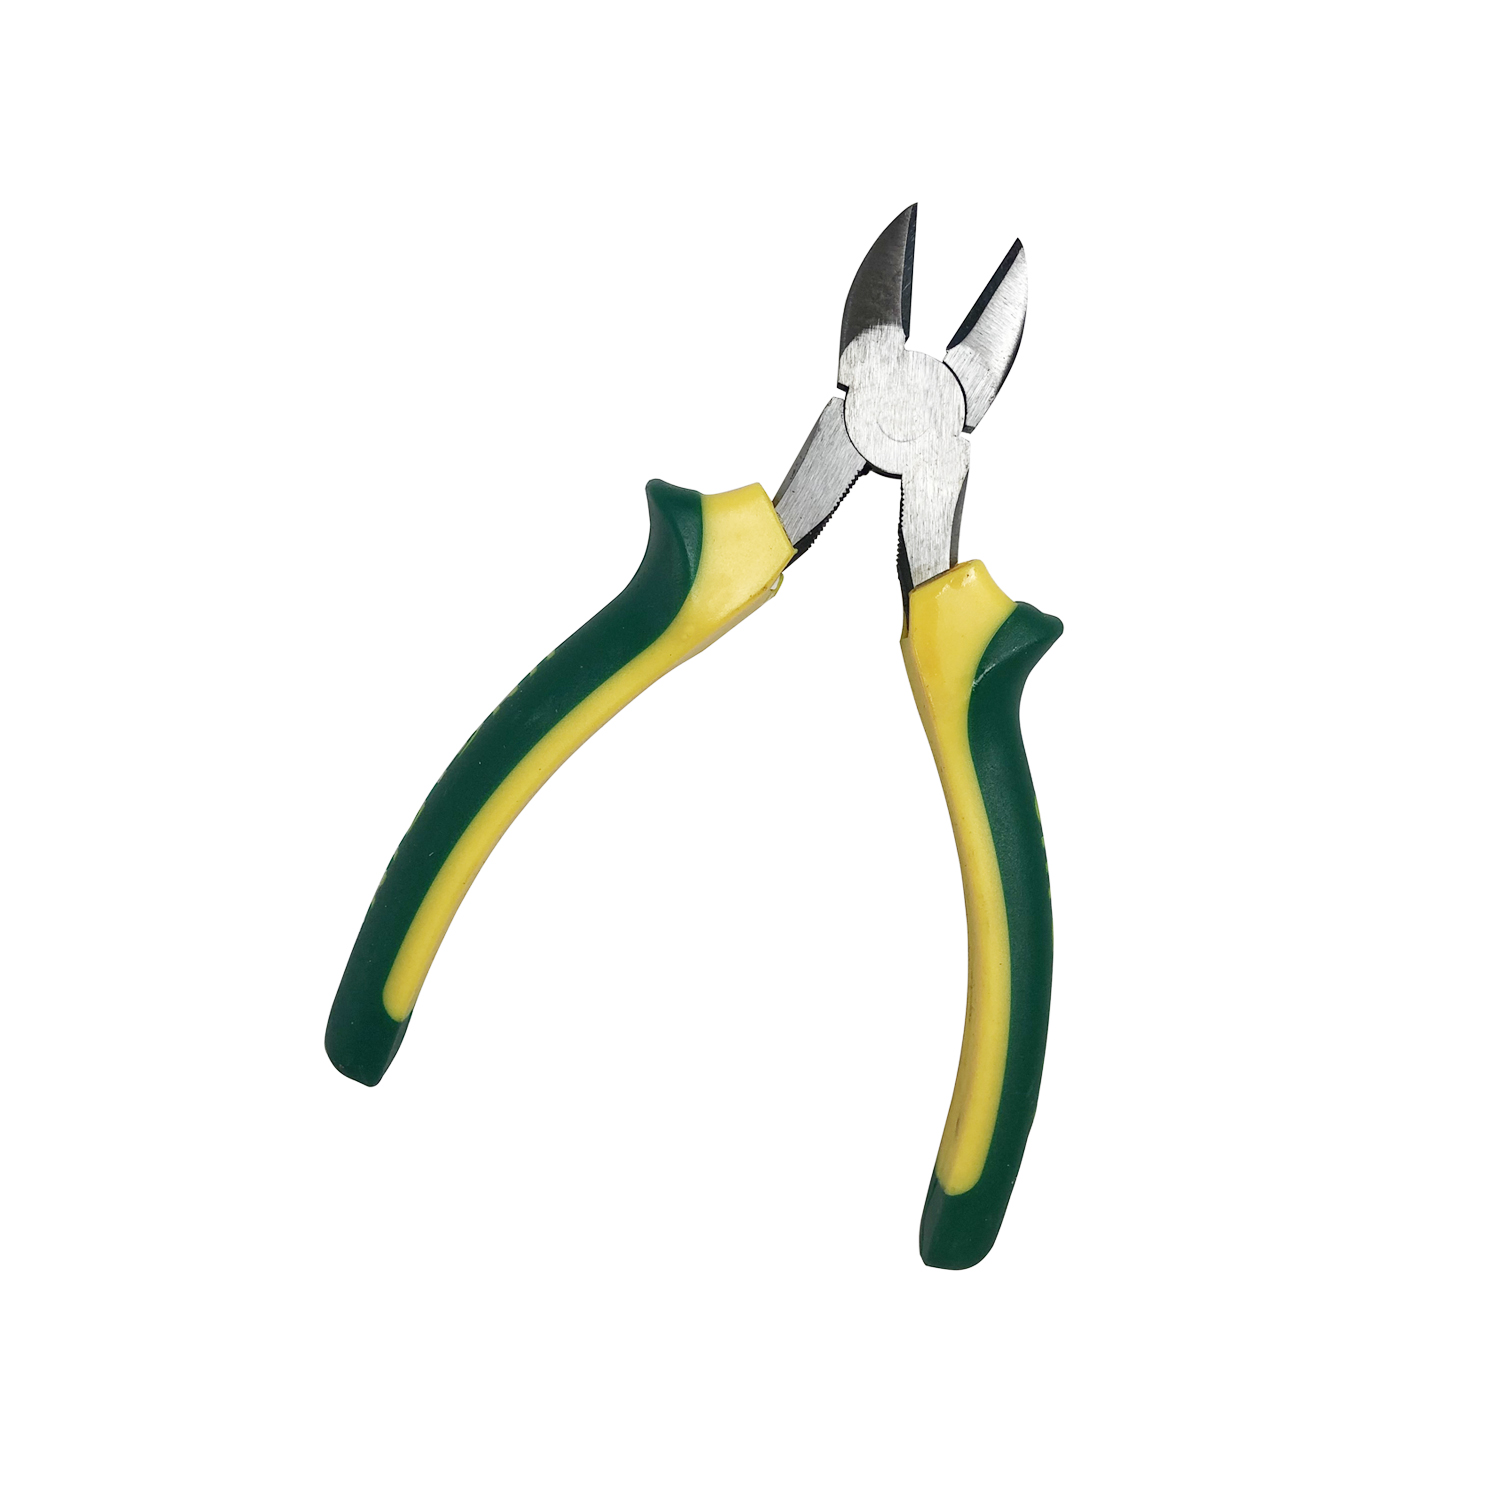 6 Inch Wire Cutter Diagonal Cutting Pliers WT Ergonomic Anti-slip Handle Grip For Processing Soft Wire Winding Household Electrician Tool